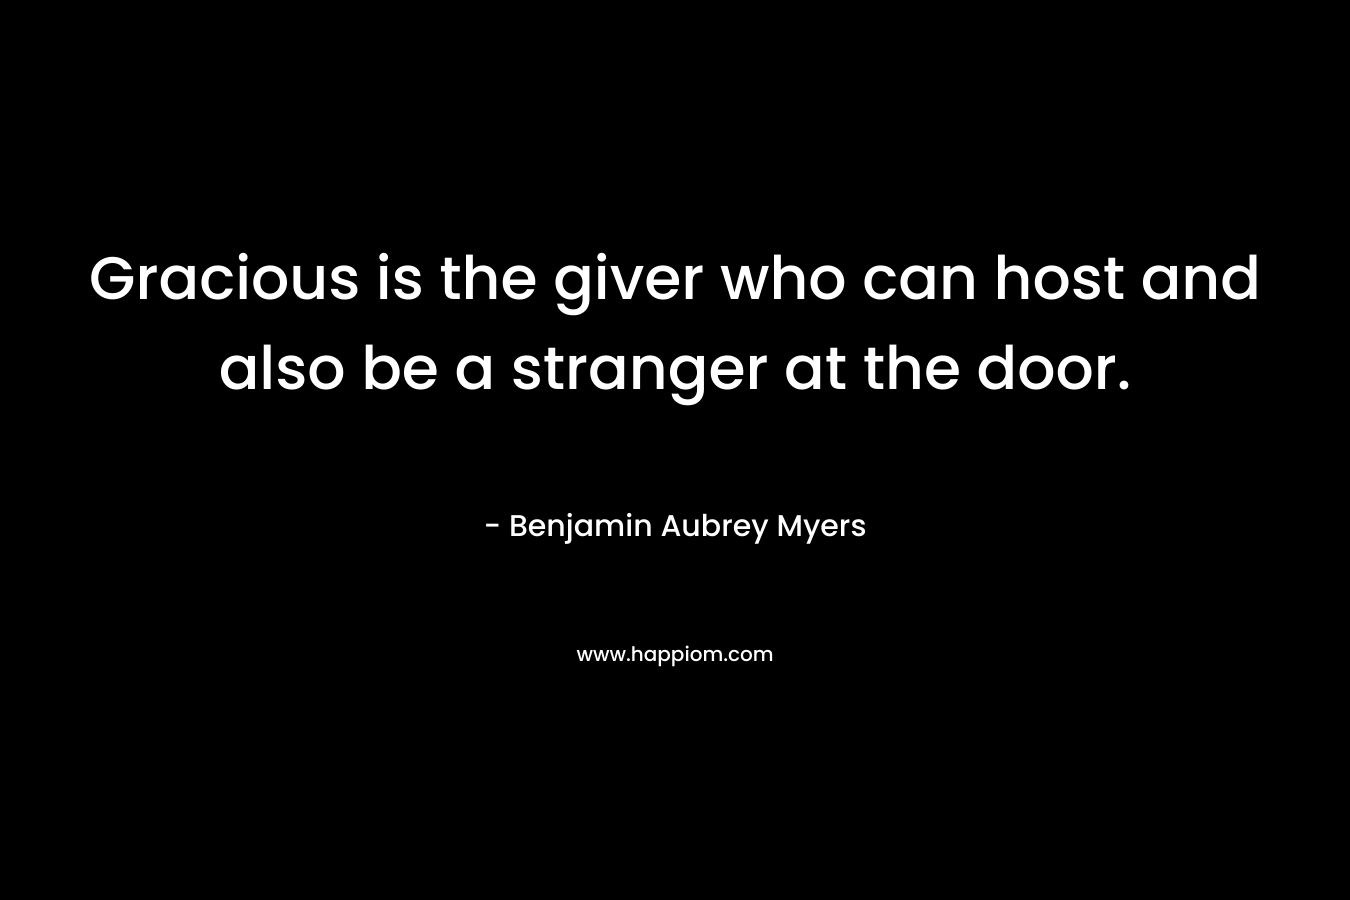 Gracious is the giver who can host and also be a stranger at the door.